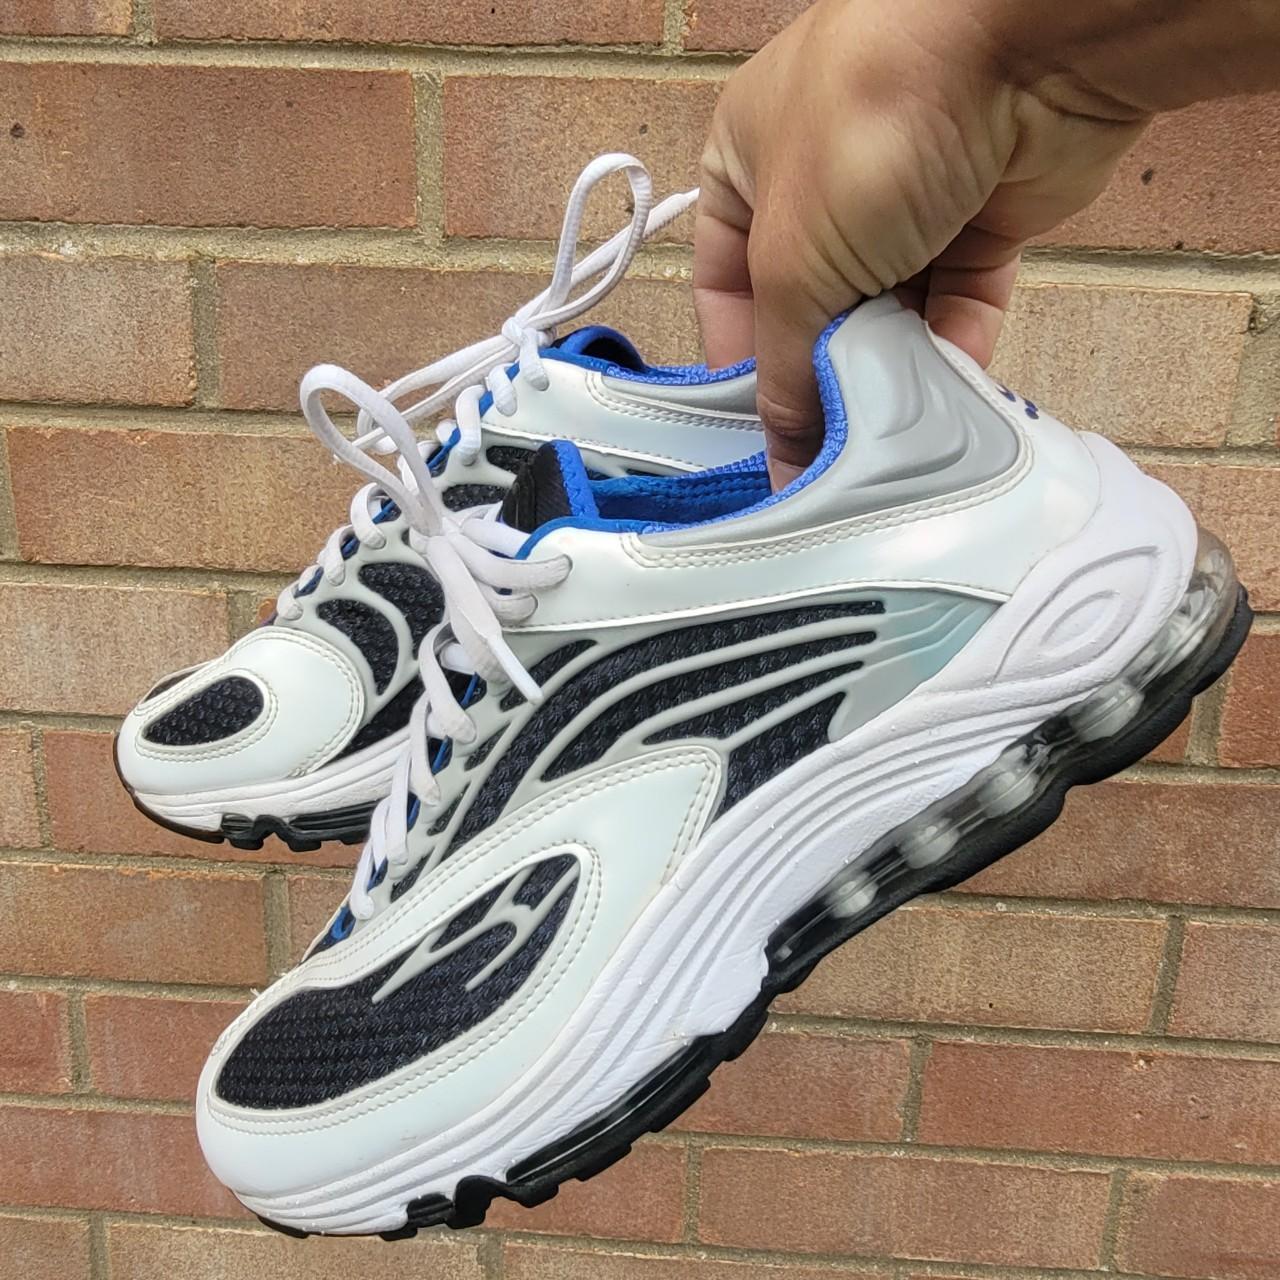 Nike Air Max Tuned Racer Men's Trainers blue white... - Depop